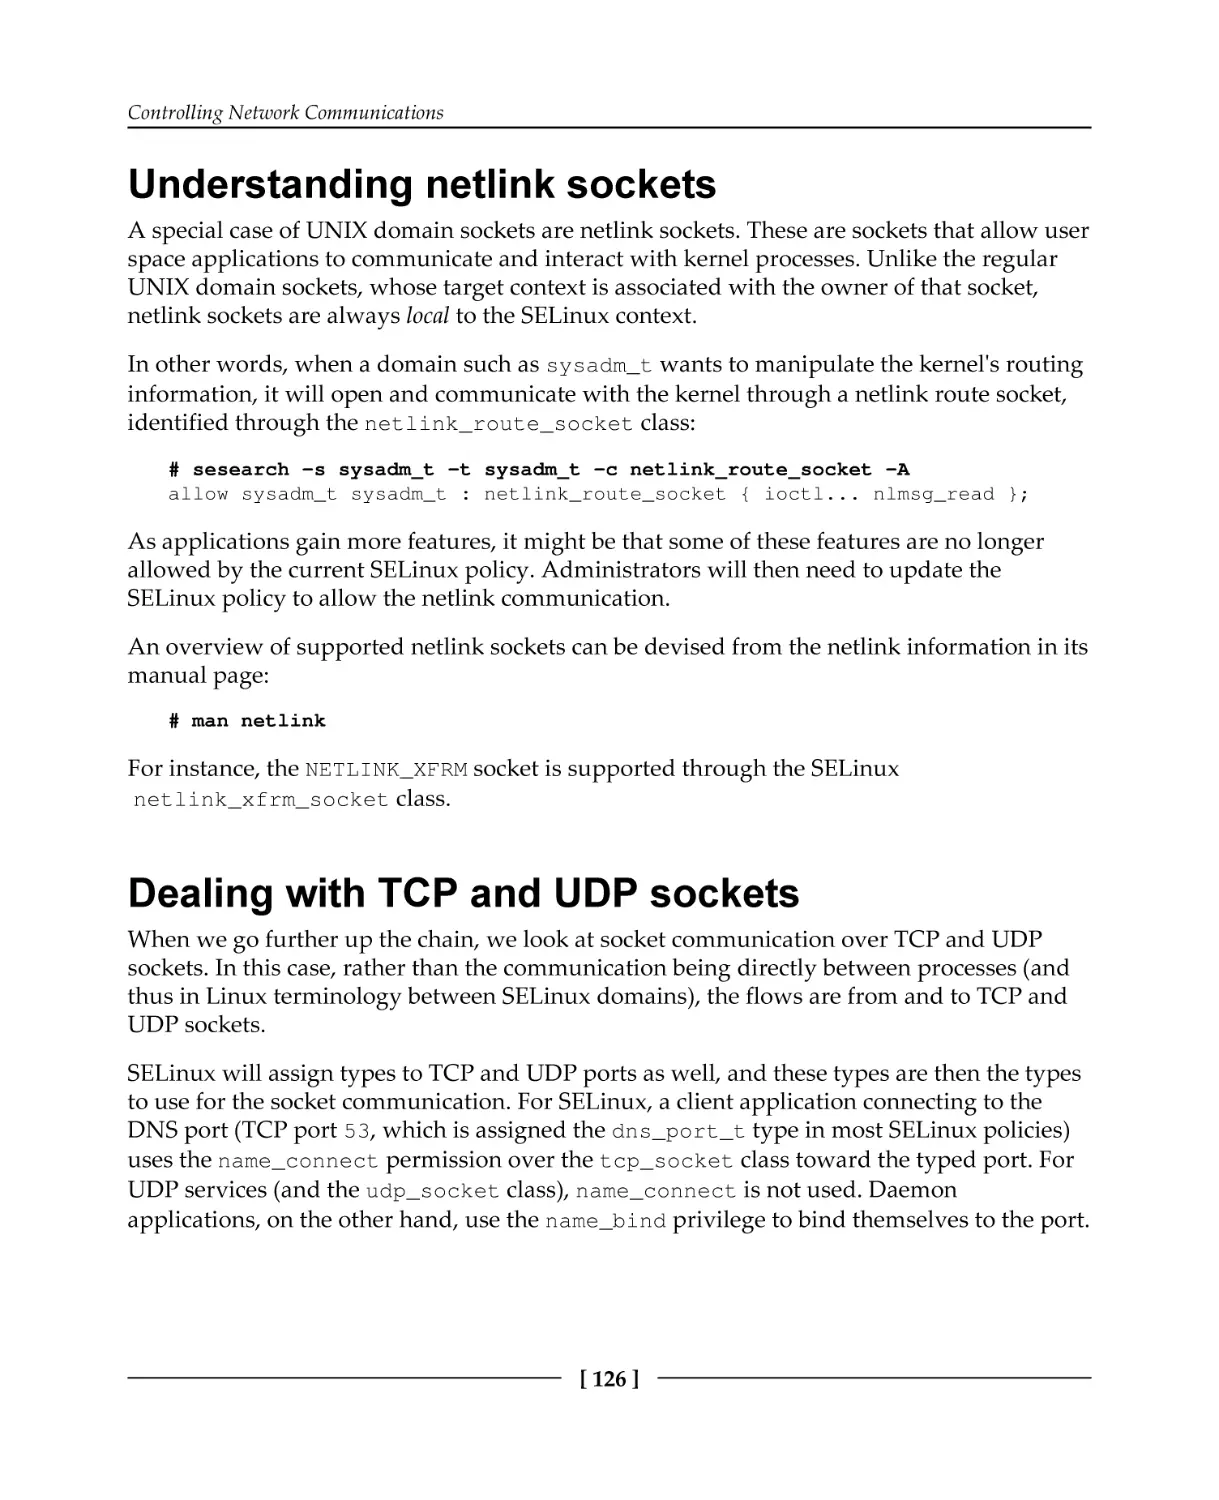 Understanding netlink sockets
Dealing with TCP and UDP sockets